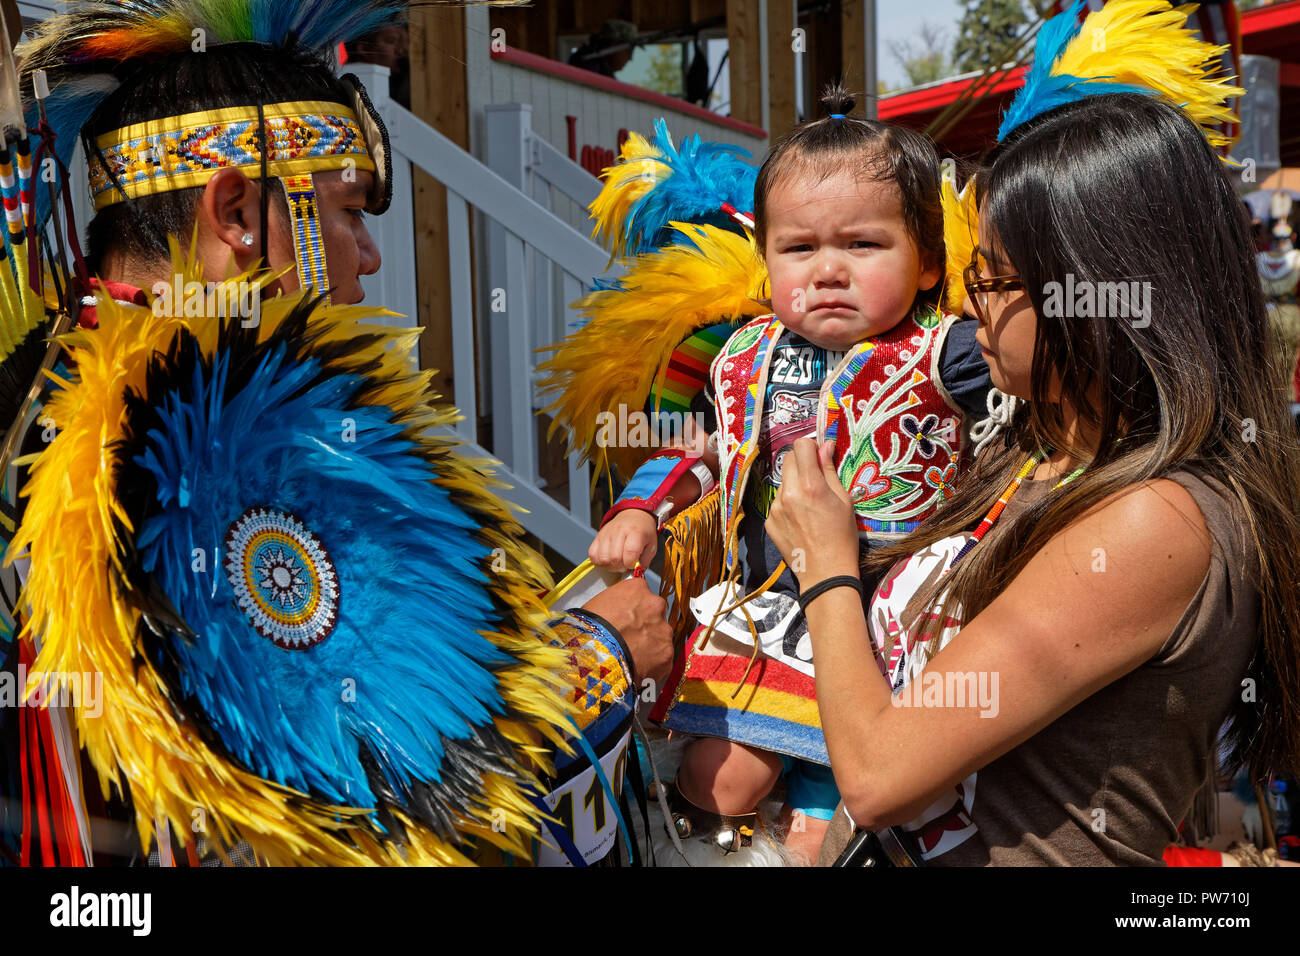 BISMARK, NORTH DAKOTA, September 8, 2018 : A family at the 49th annual United Tribes Pow Wow, one large outdoor event that gathers more than 900 dance Stock Photo